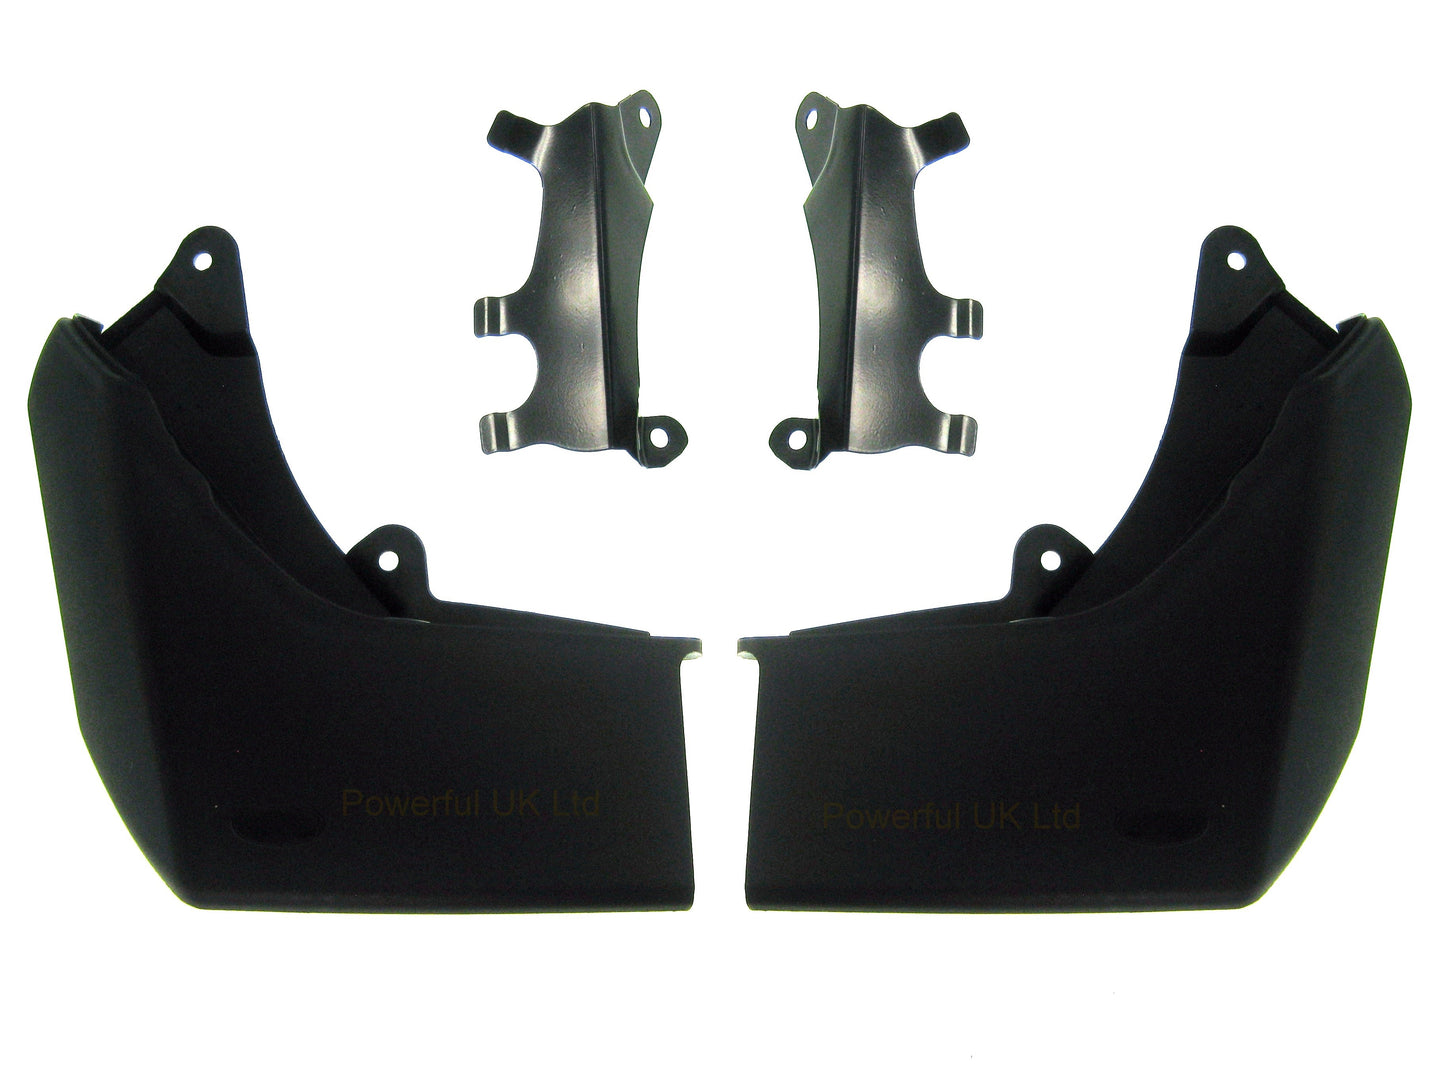 Aftermarket Mudflap kit - Front - for Land Rover Discovery 3 & 4